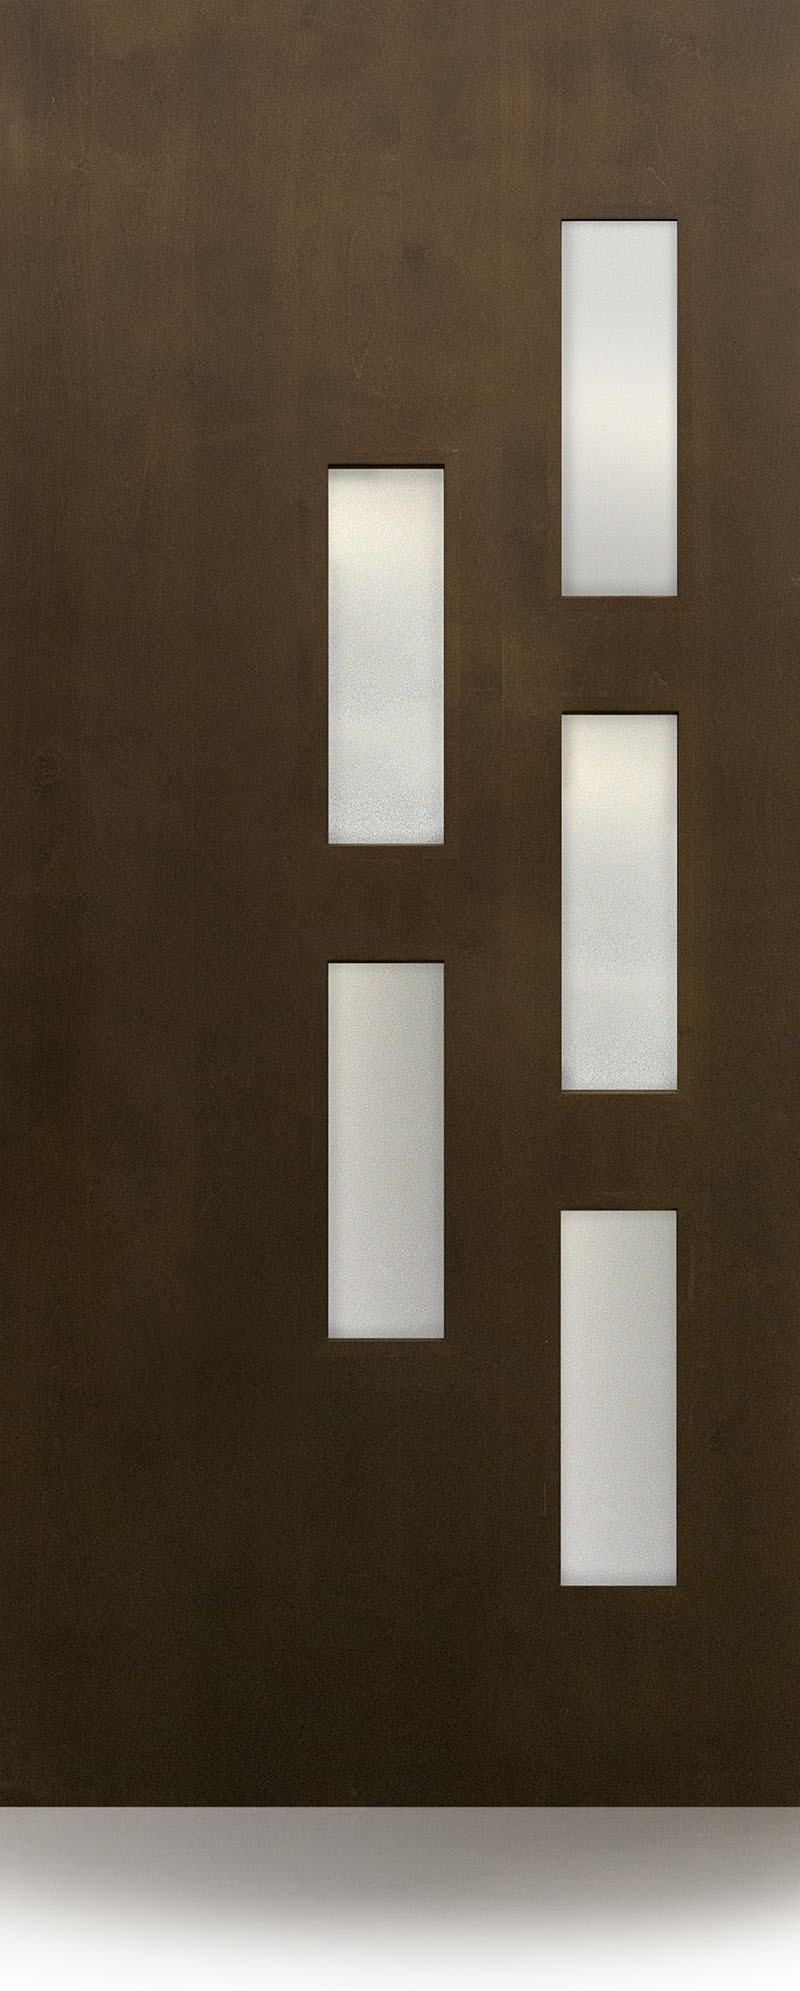 Flush door with 5 lites placed in an asymmetrical vertical pattern